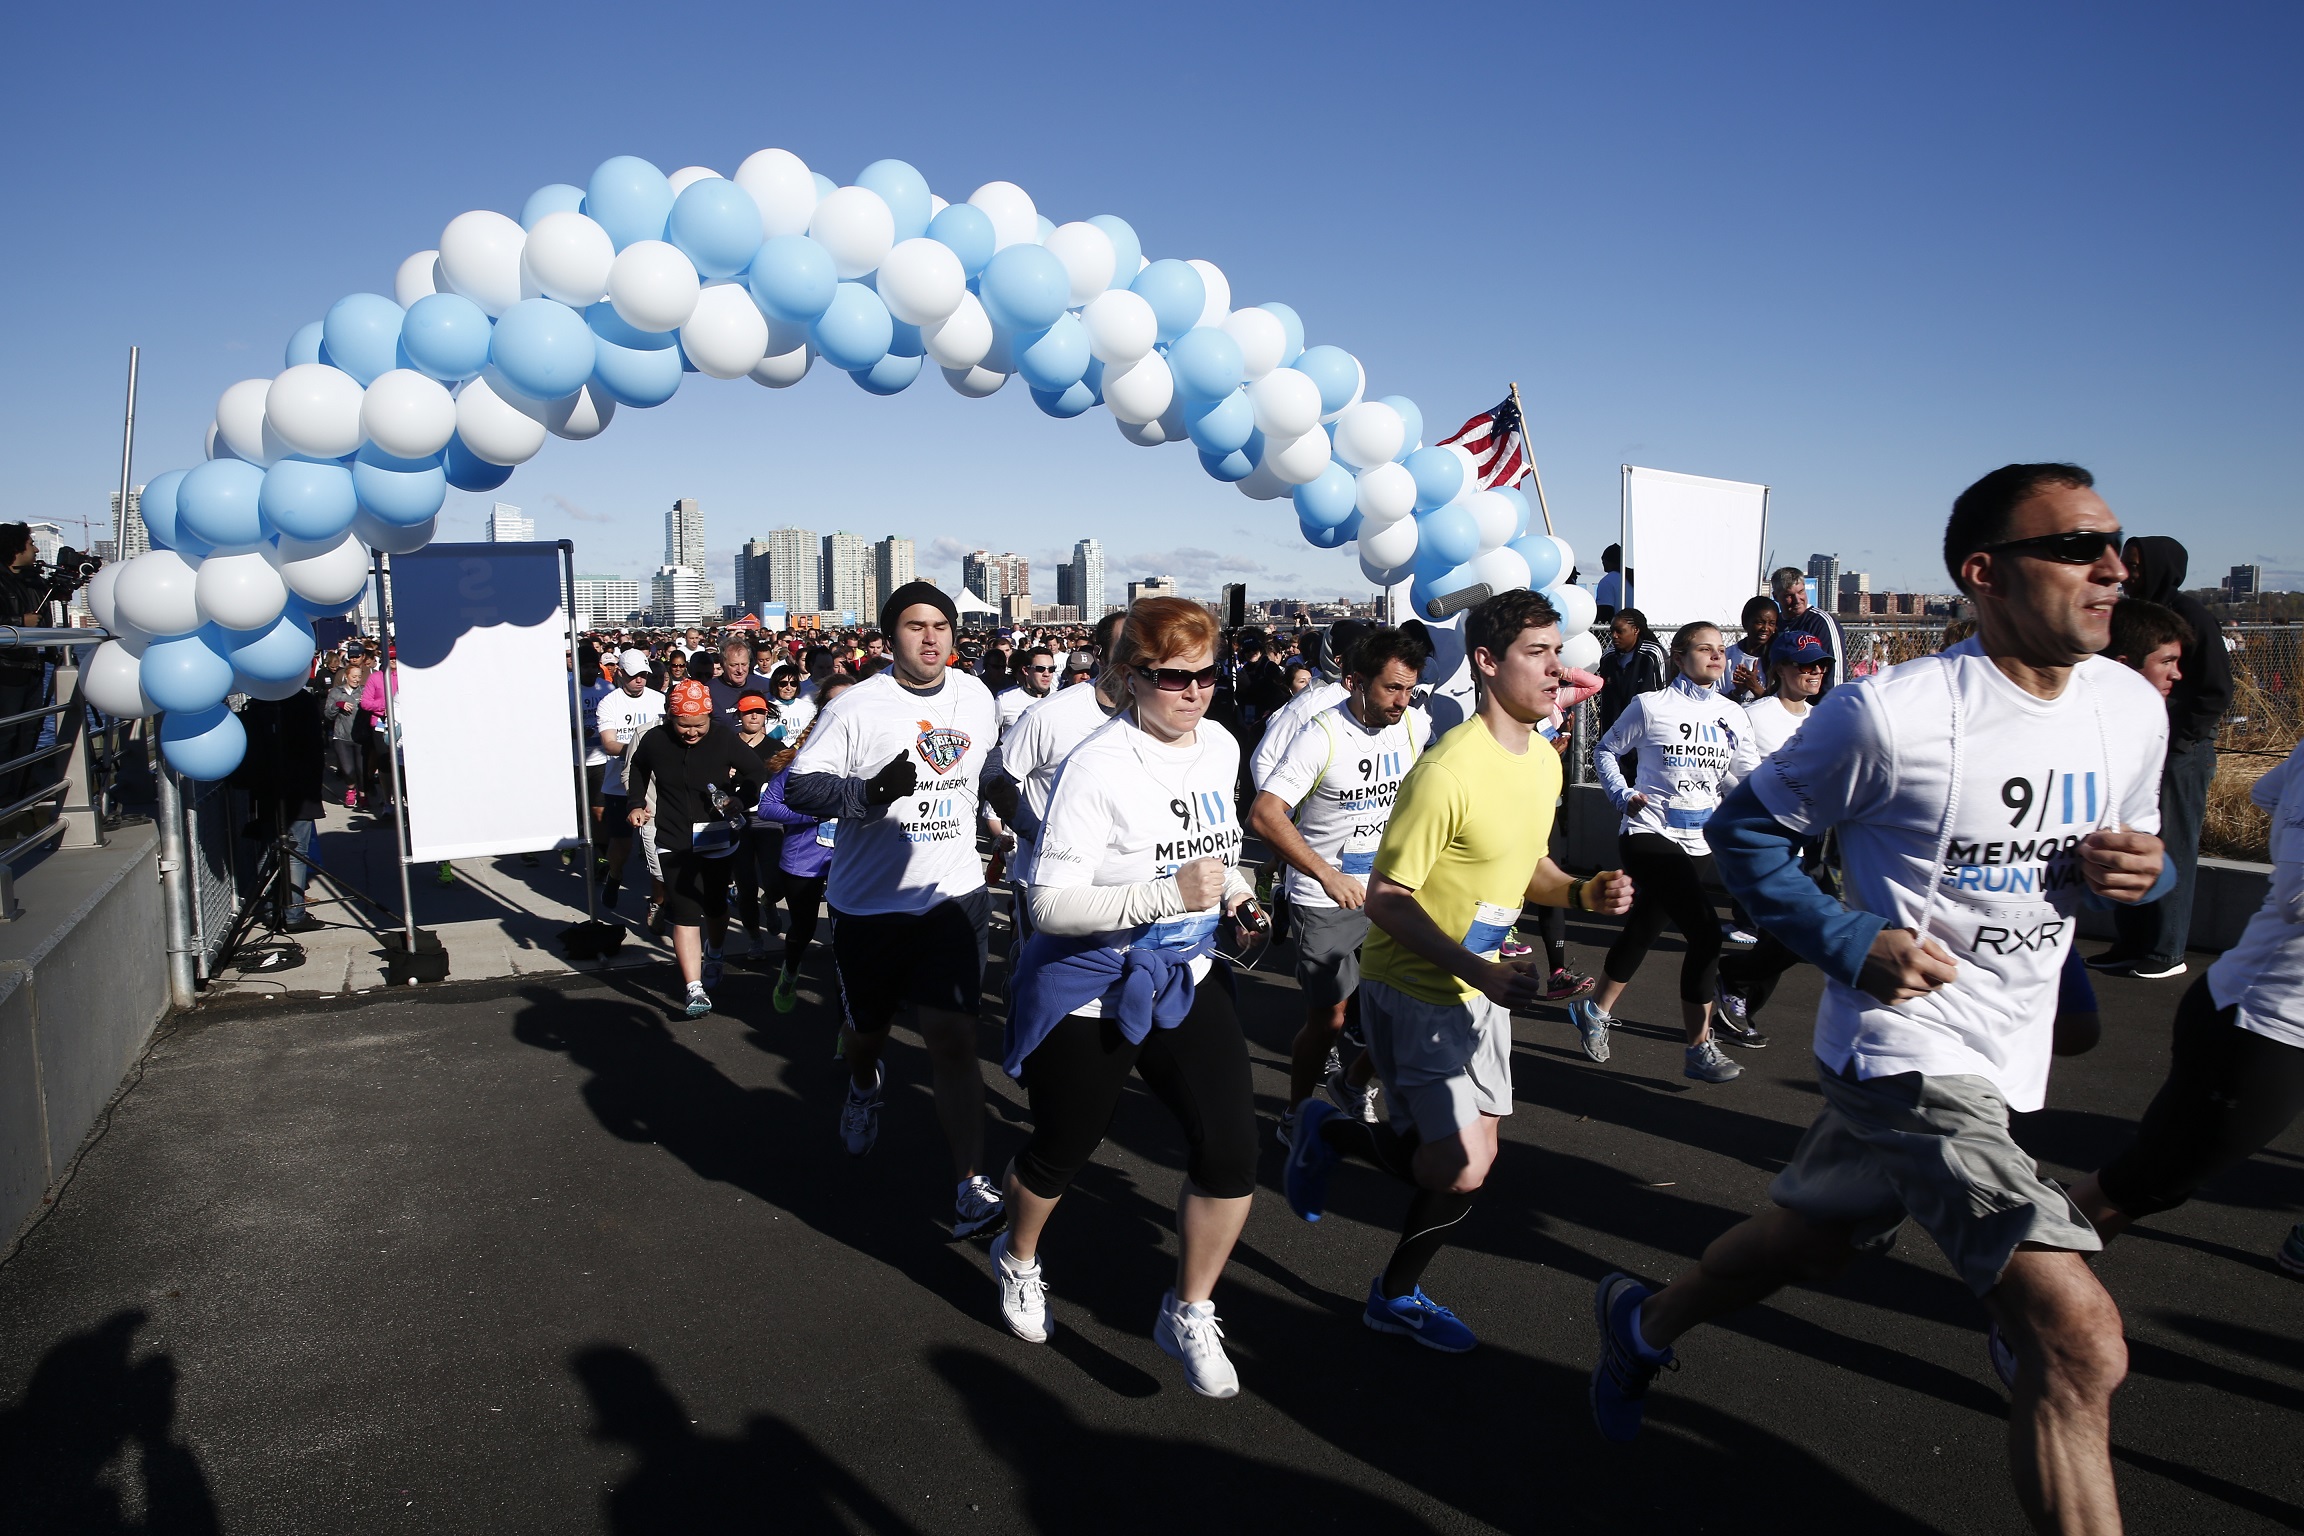 Participants across the finish start line at the 9/11 Memorial 5K Run and Walk in 2014. They pass under an archway made of white and blue balloons.